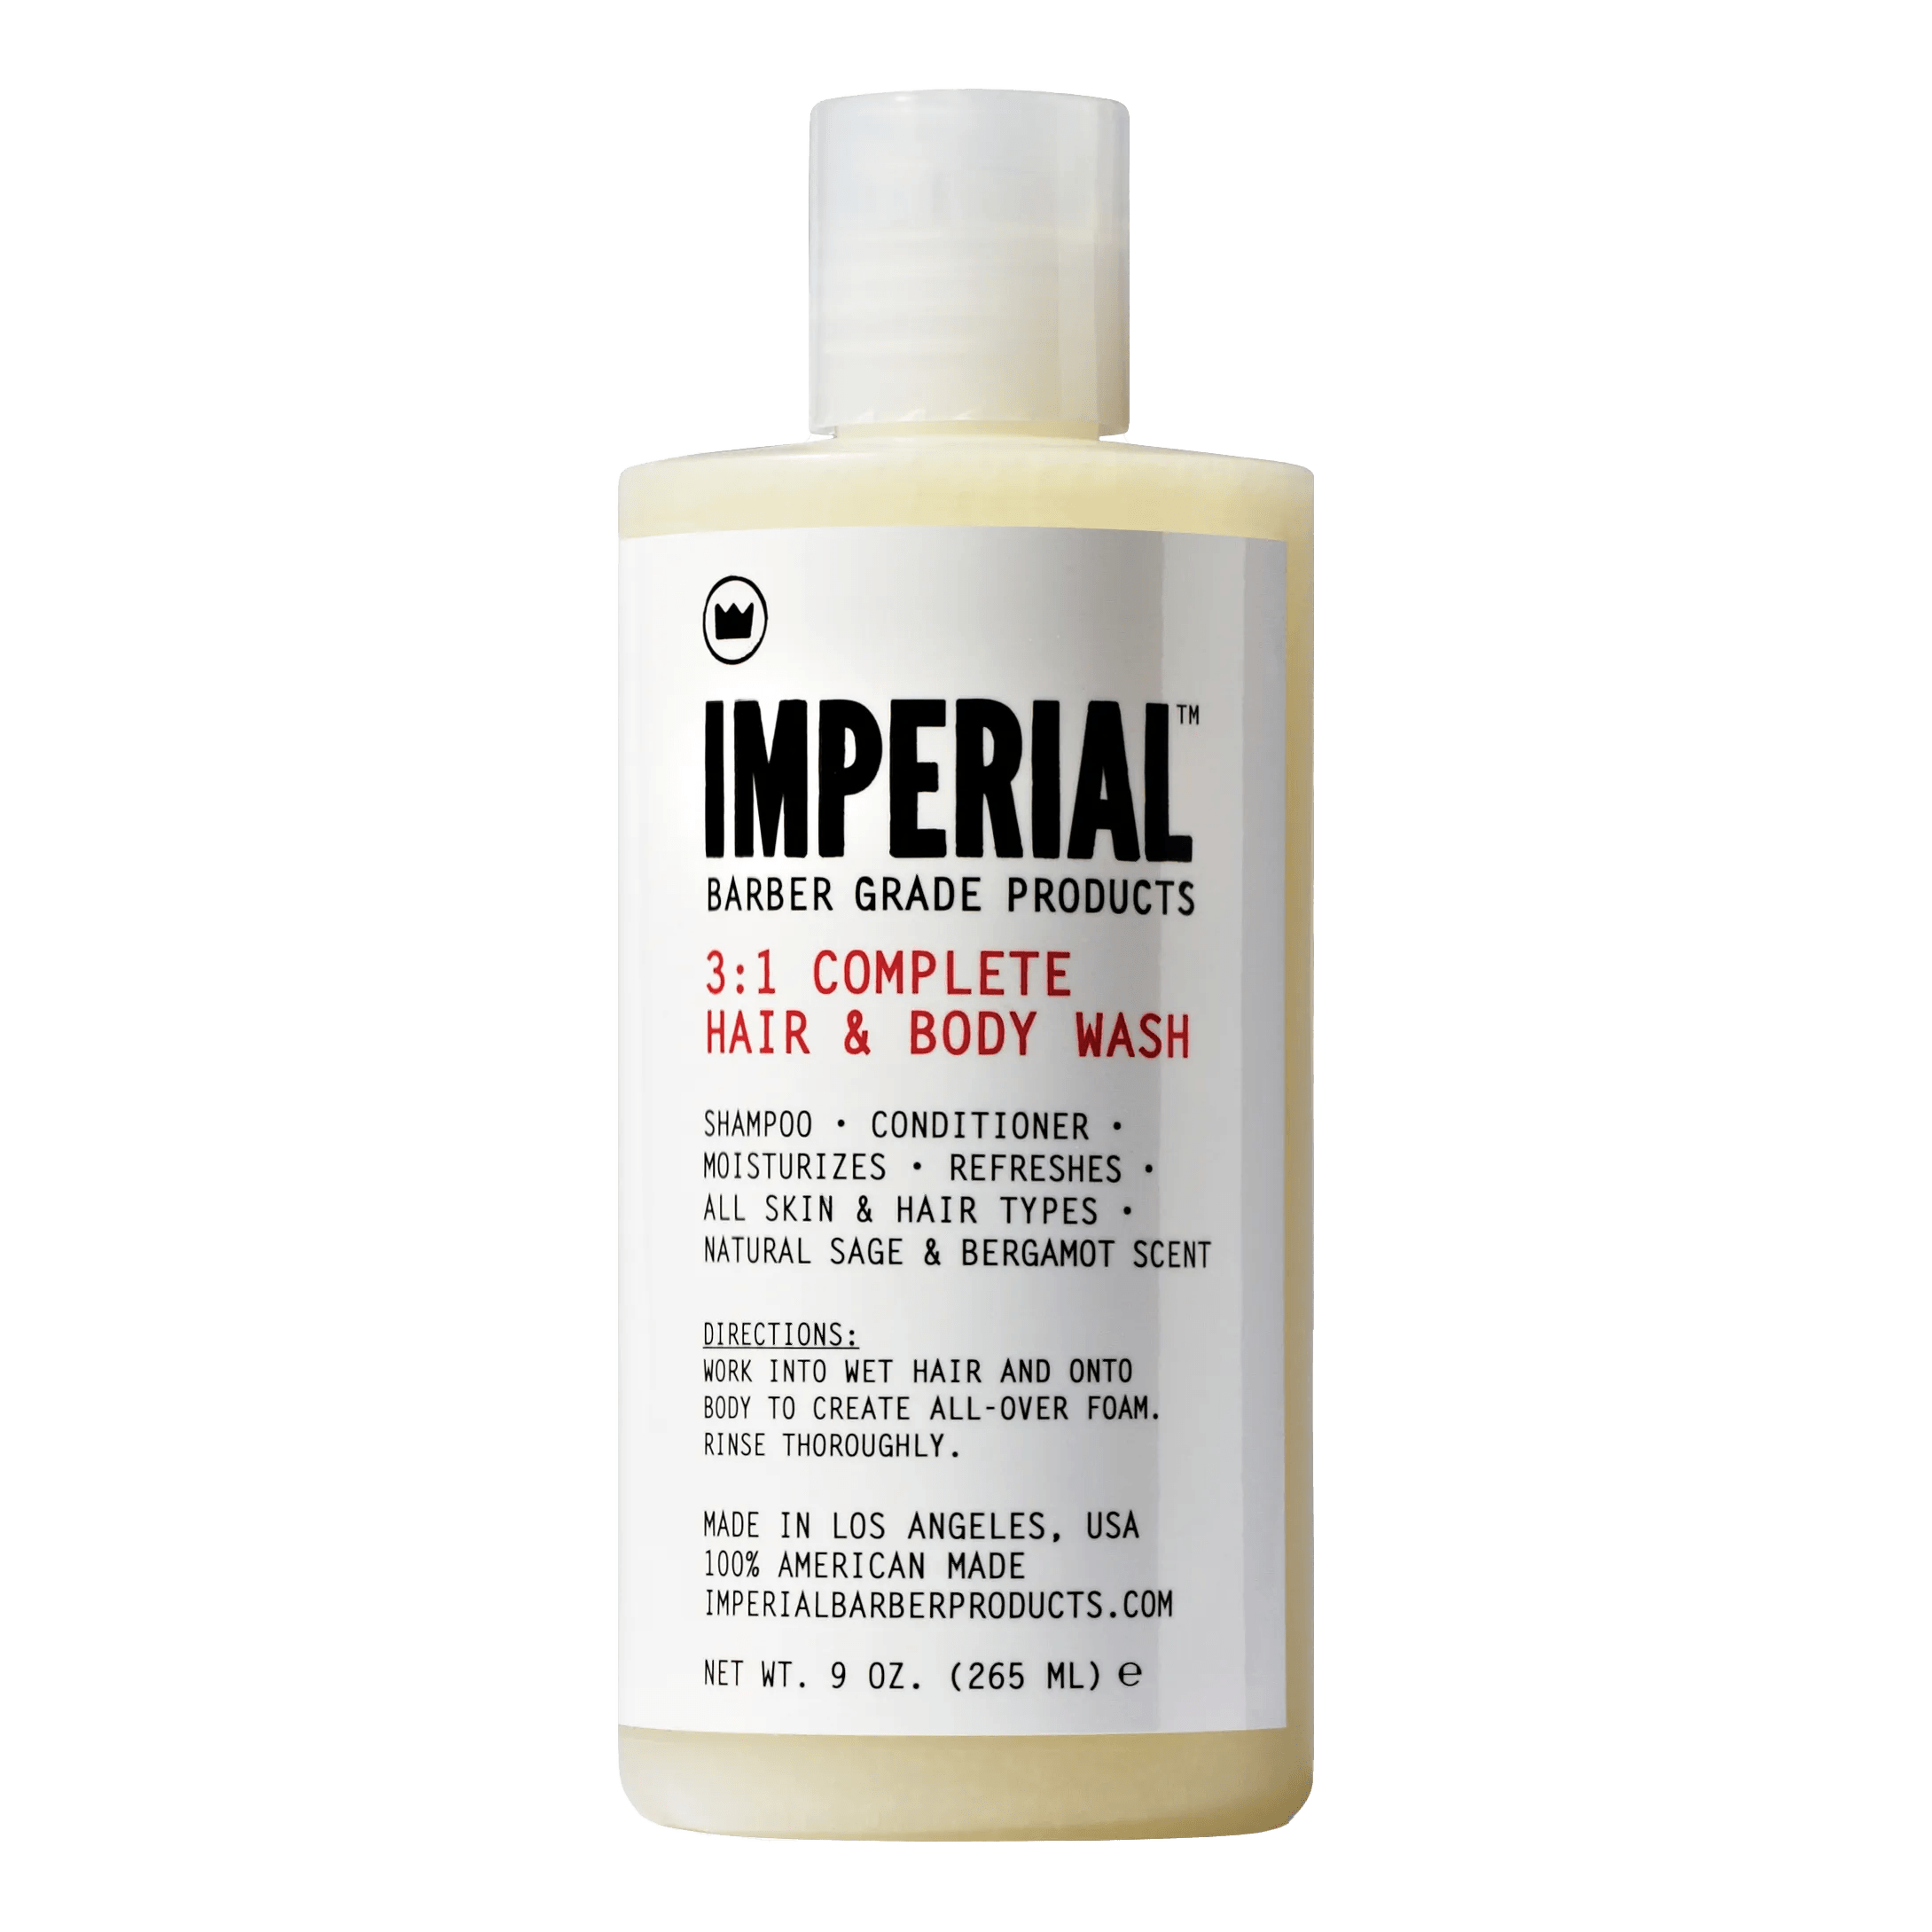 Imperial Barber Products - 3:1 Complete Hair & Body Wash - Sjampo og kroppsvask